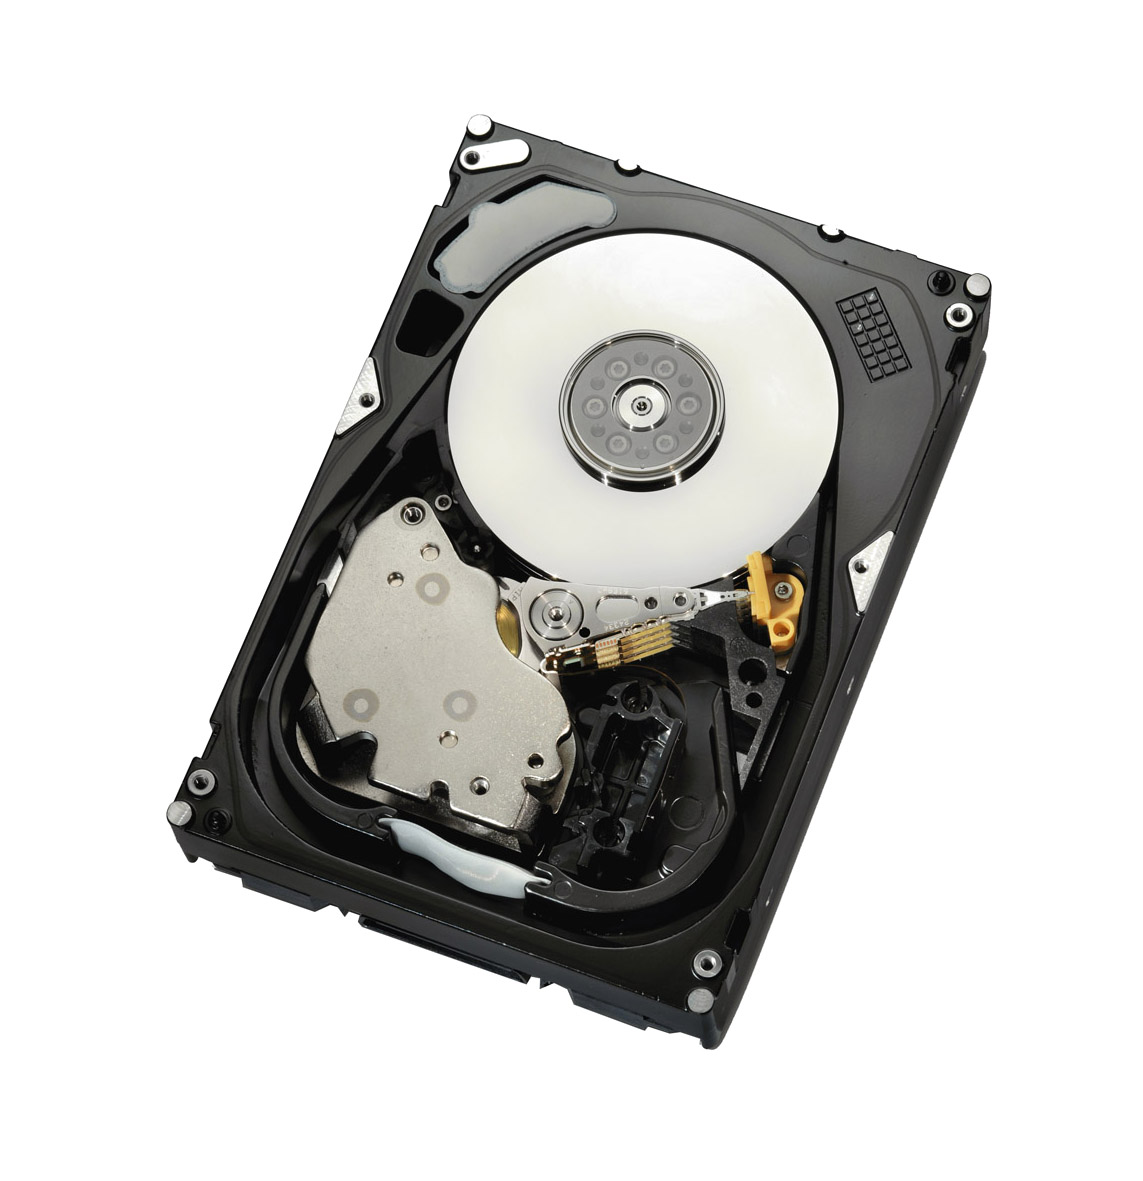 09CDHG Dell 4TB 7200RPM SAS 6Gbps 3.5-inch Internal Hard Drive with Tray for PowerEdge and PowerVault Servers